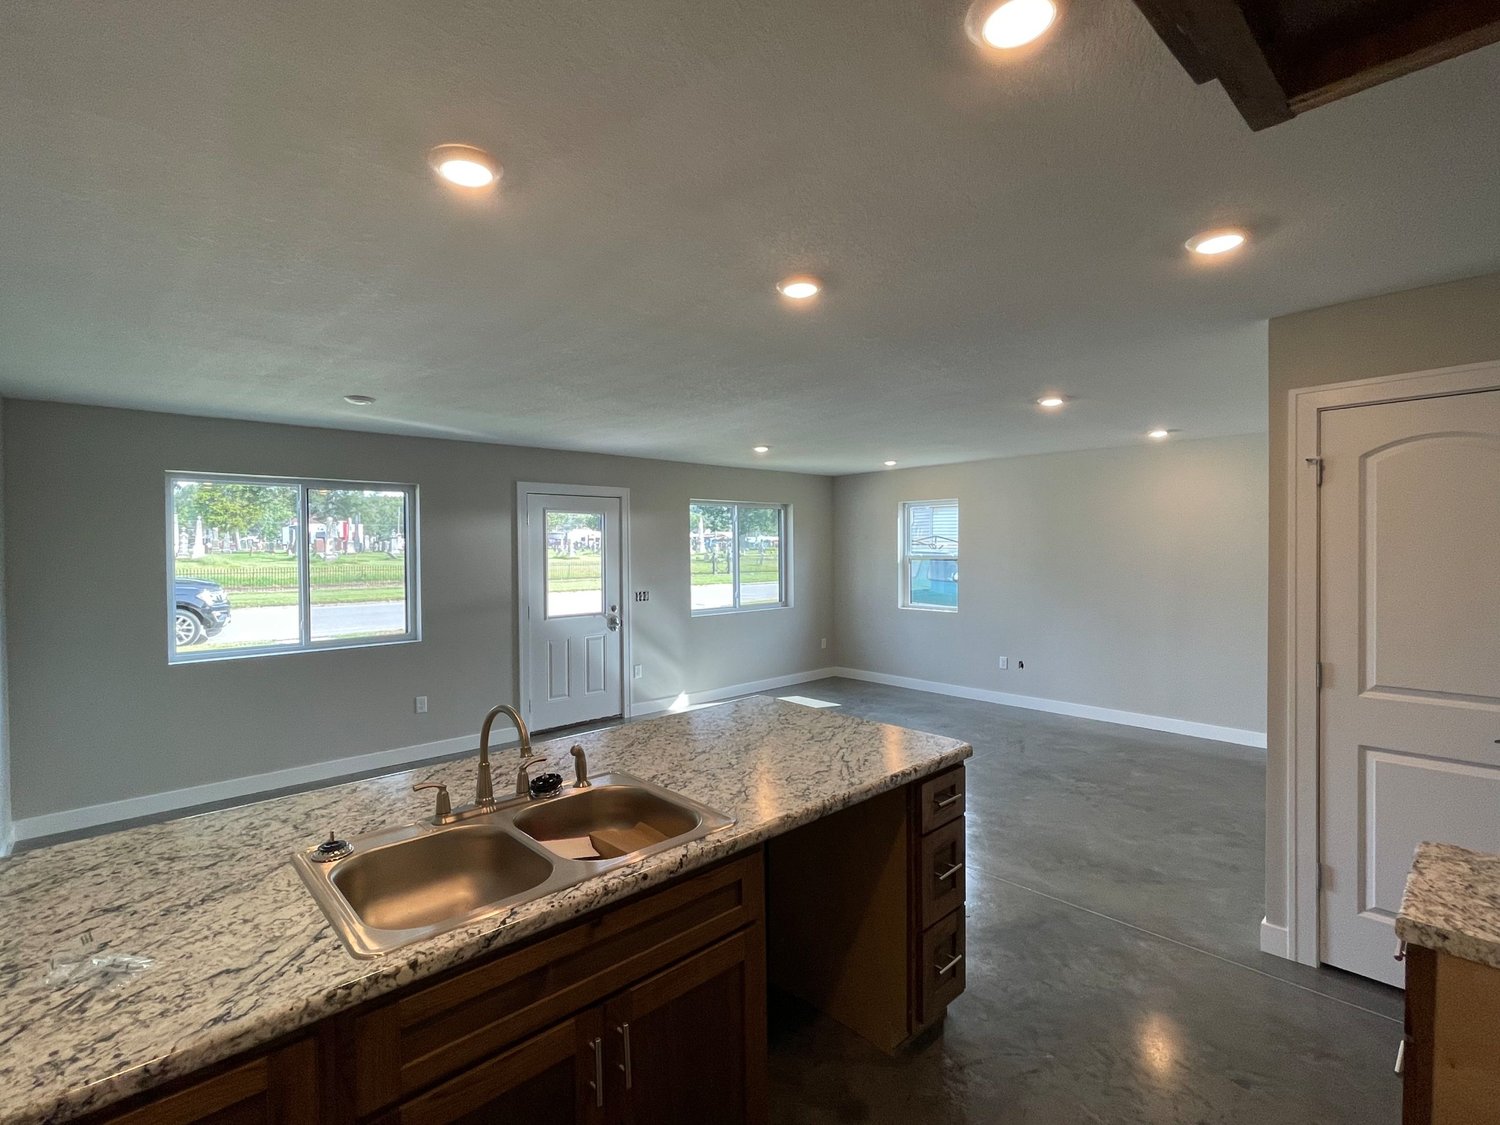 A view from the inside of the new efficient-model home built by Green Oak Development shows the large interior foot print and the view out onto Avenue H. The cement floors contain water tubes that serve as radiant heat for the all-electric home. Courtesy photo.